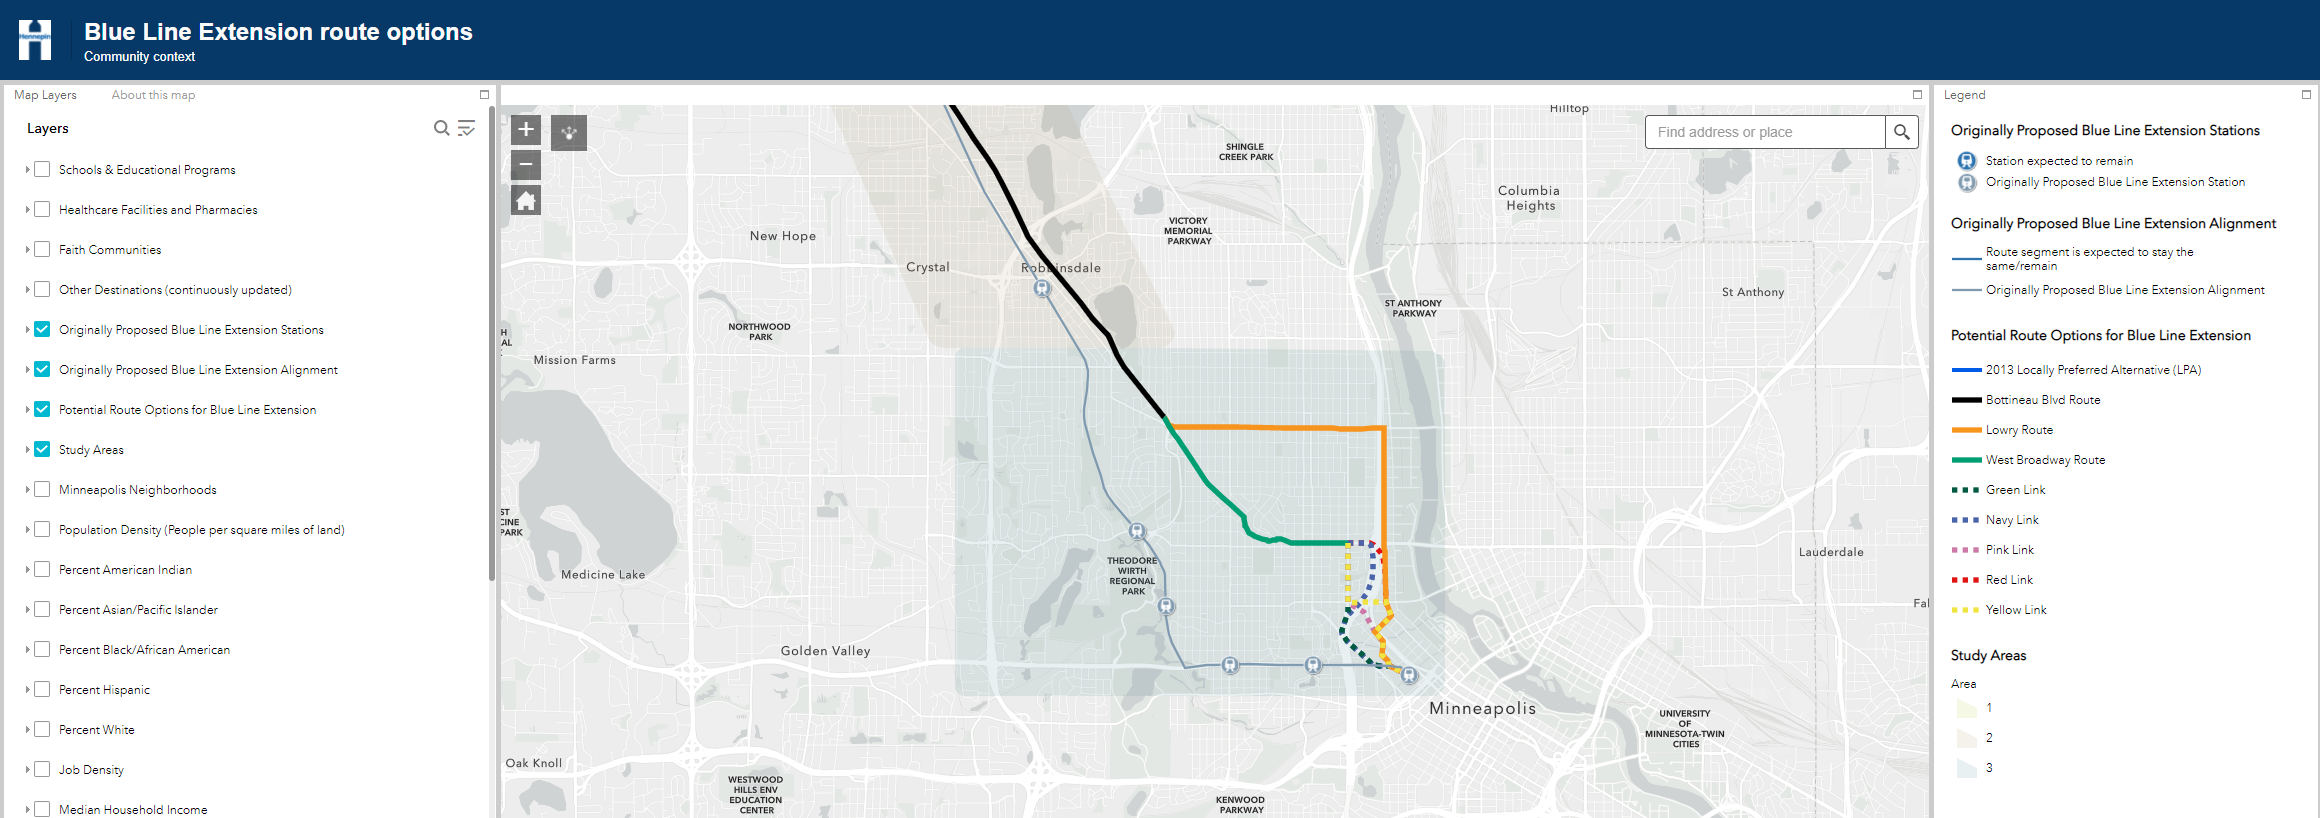 Interactive map of Blue Line Extension route options.